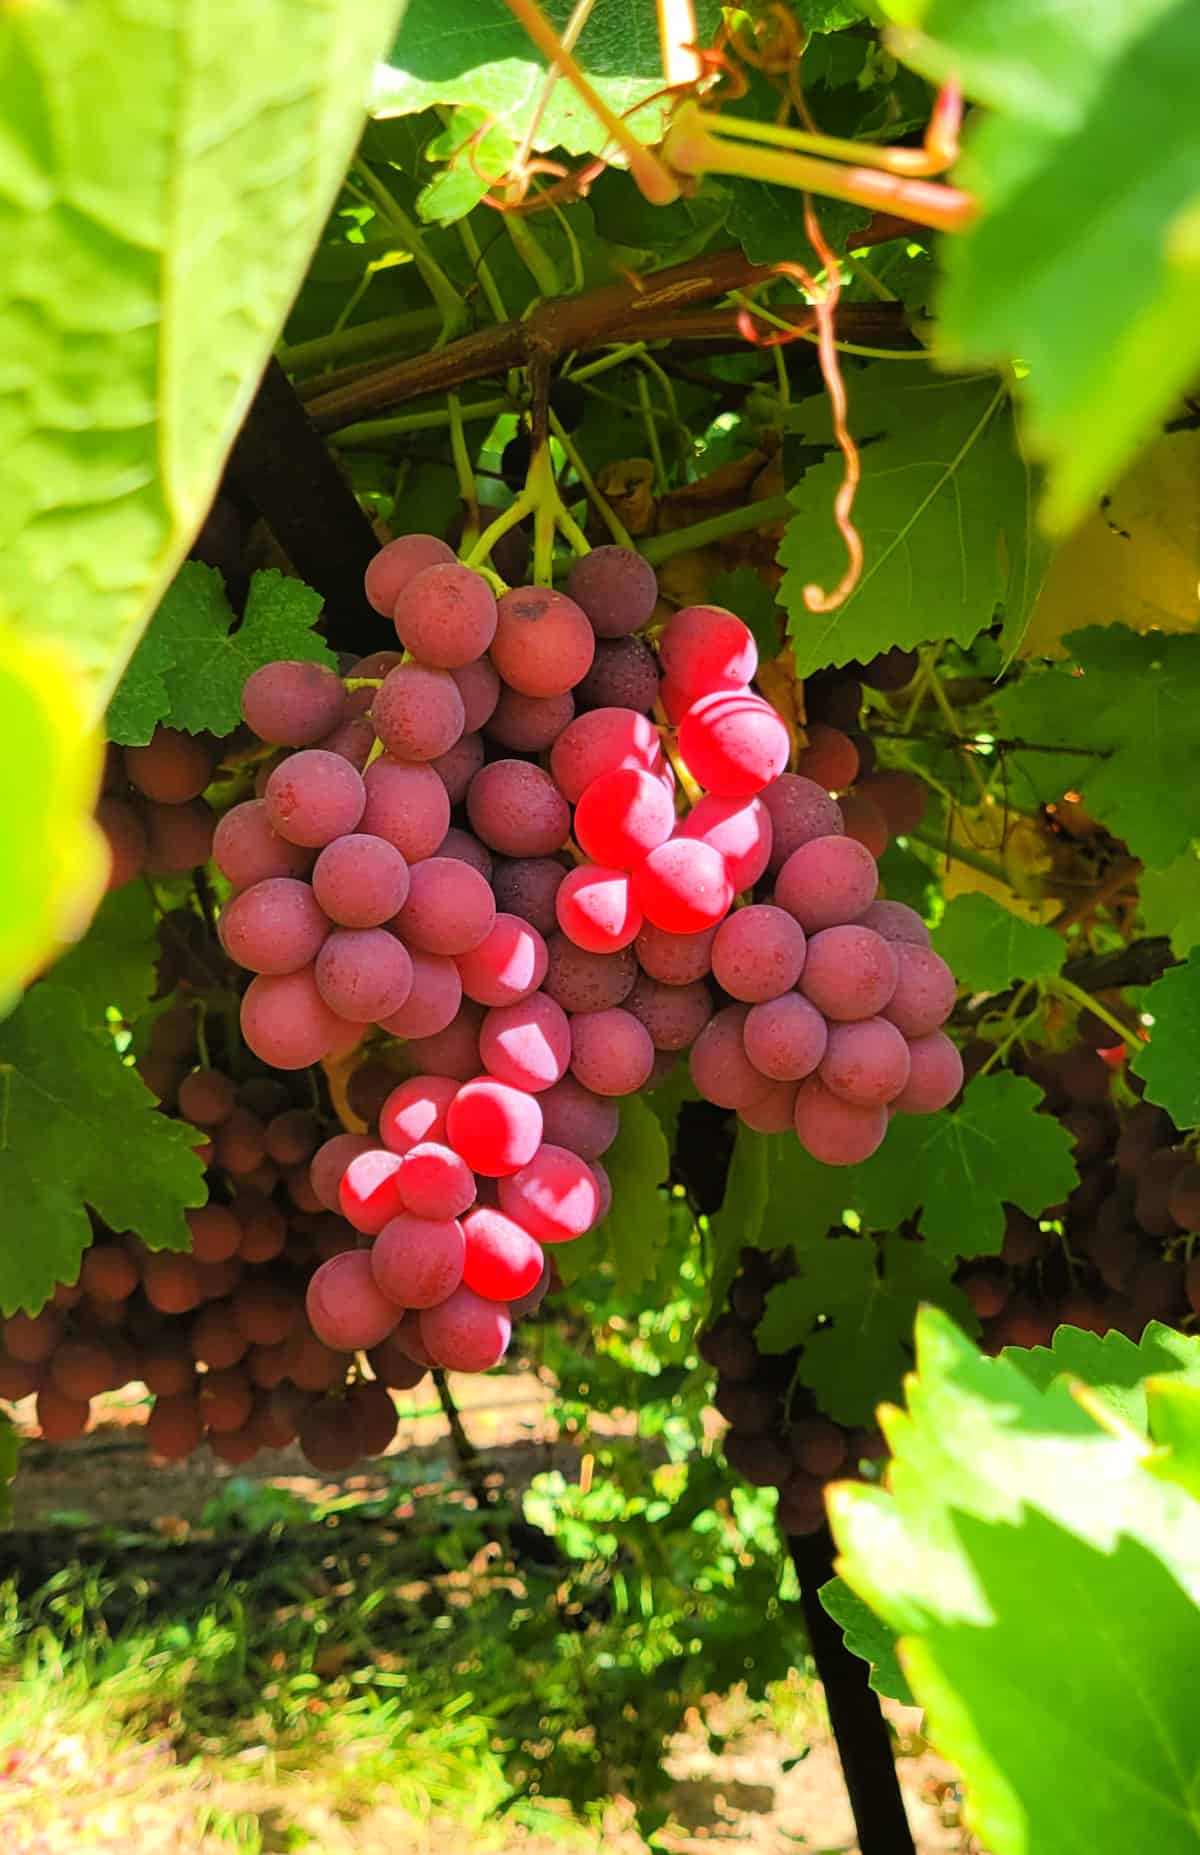 A shot of fresh table grapes on the vine.